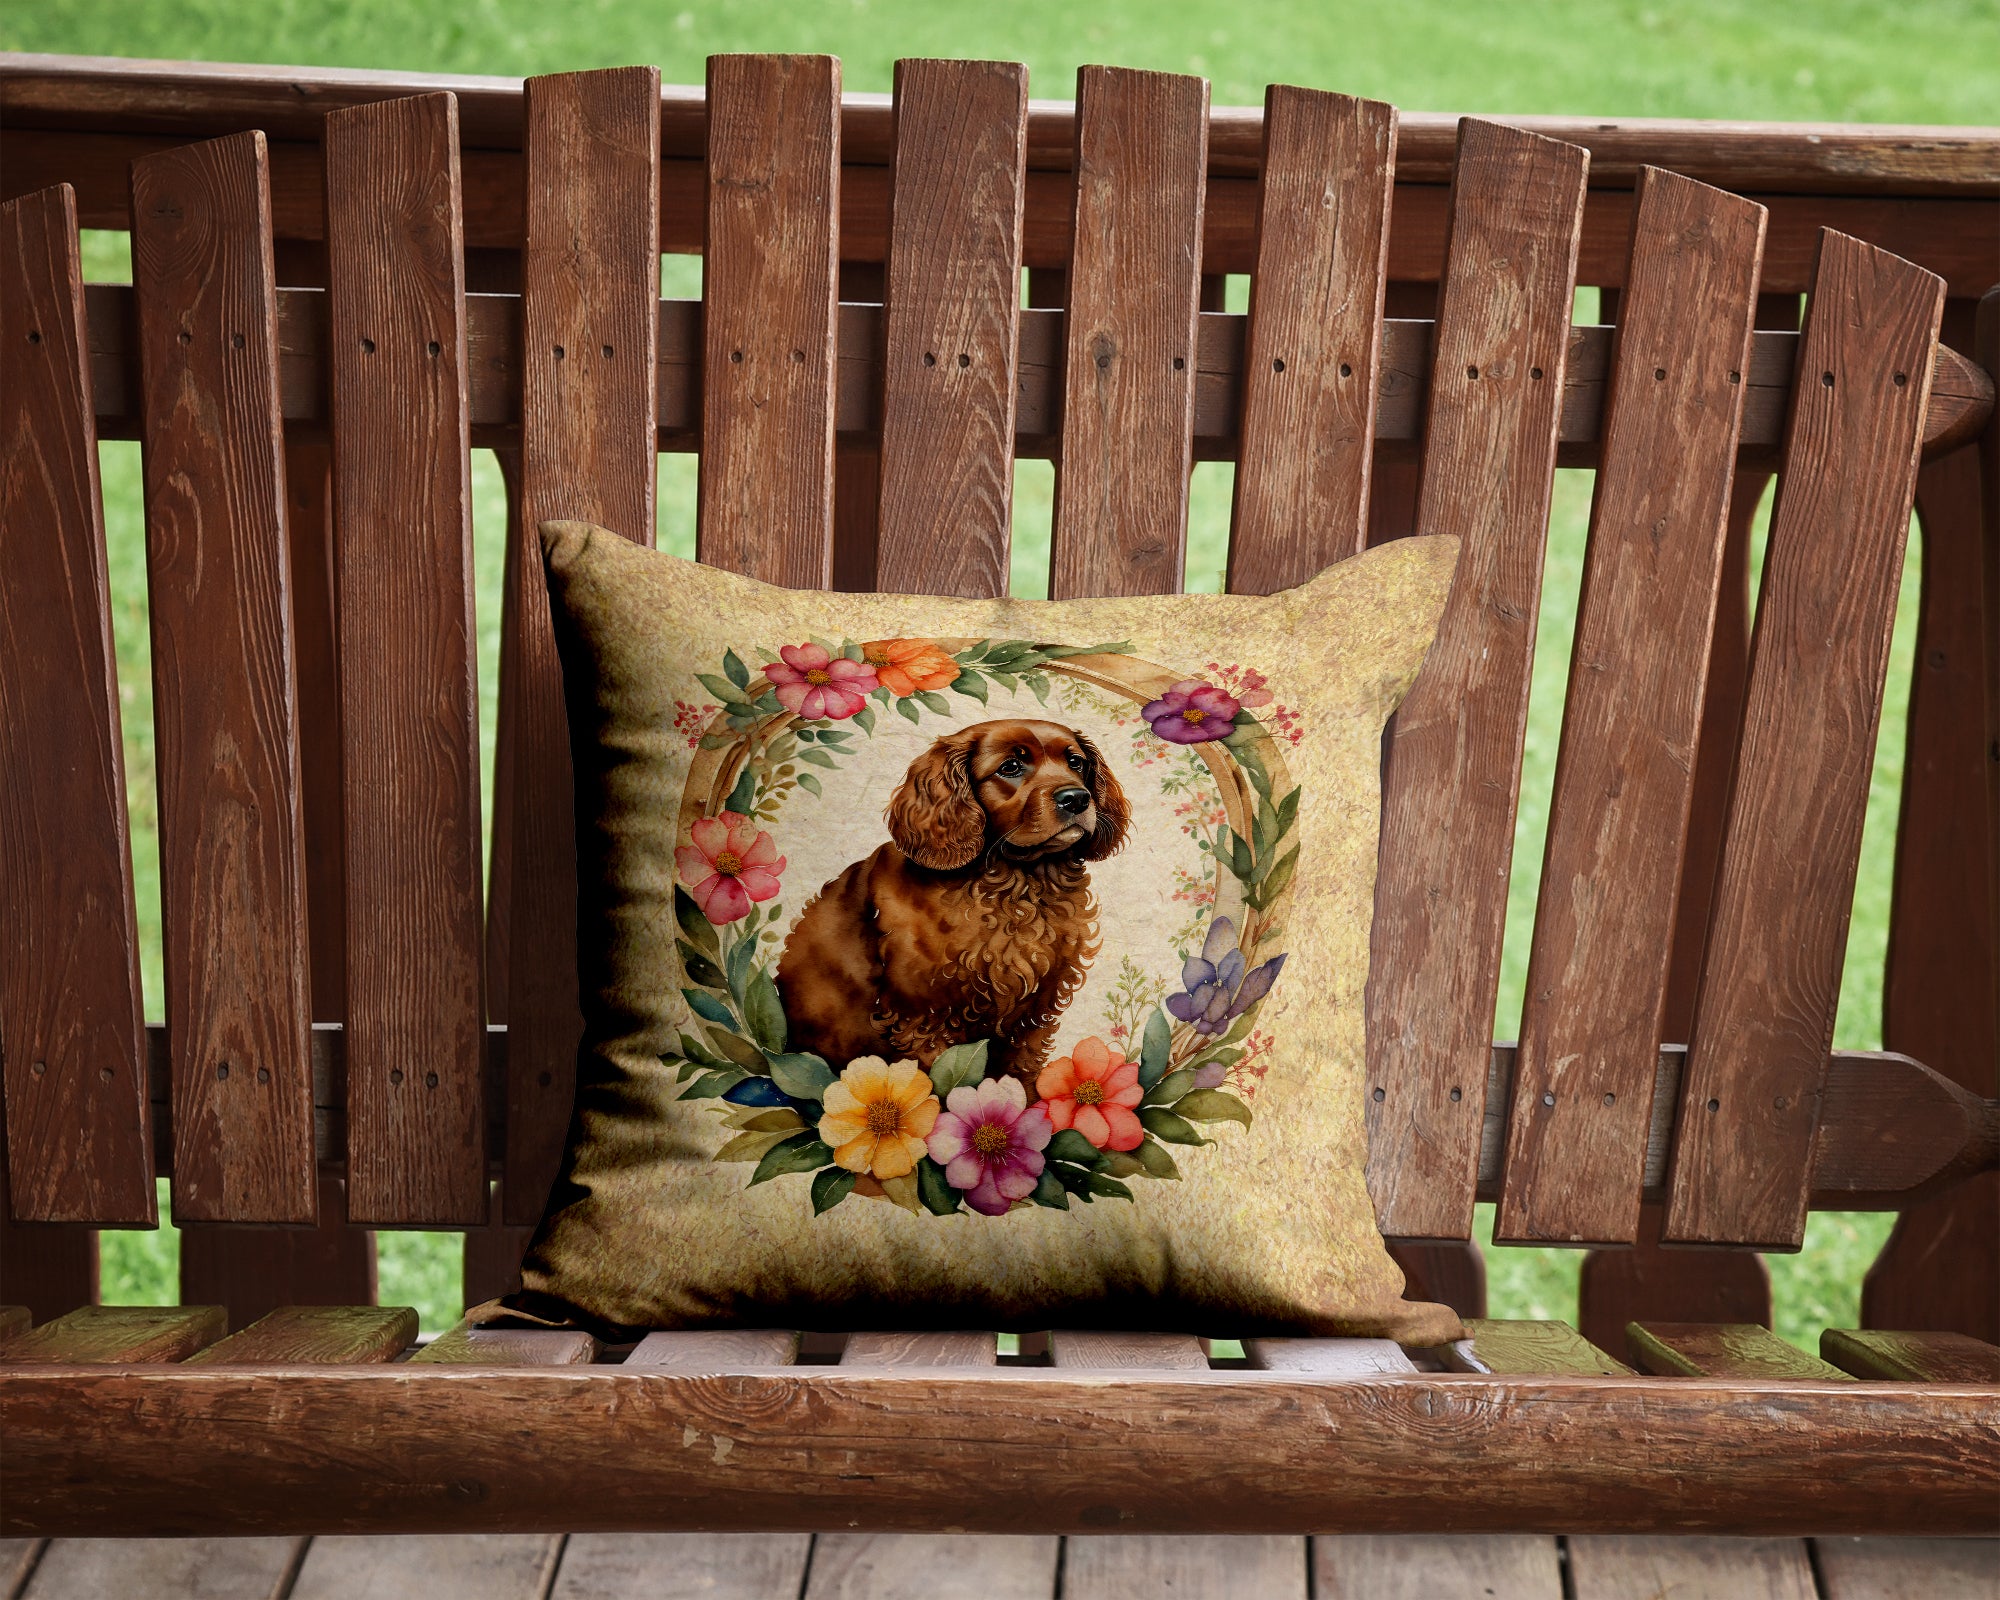 Buy this American Water Spaniel and Flowers Fabric Decorative Pillow